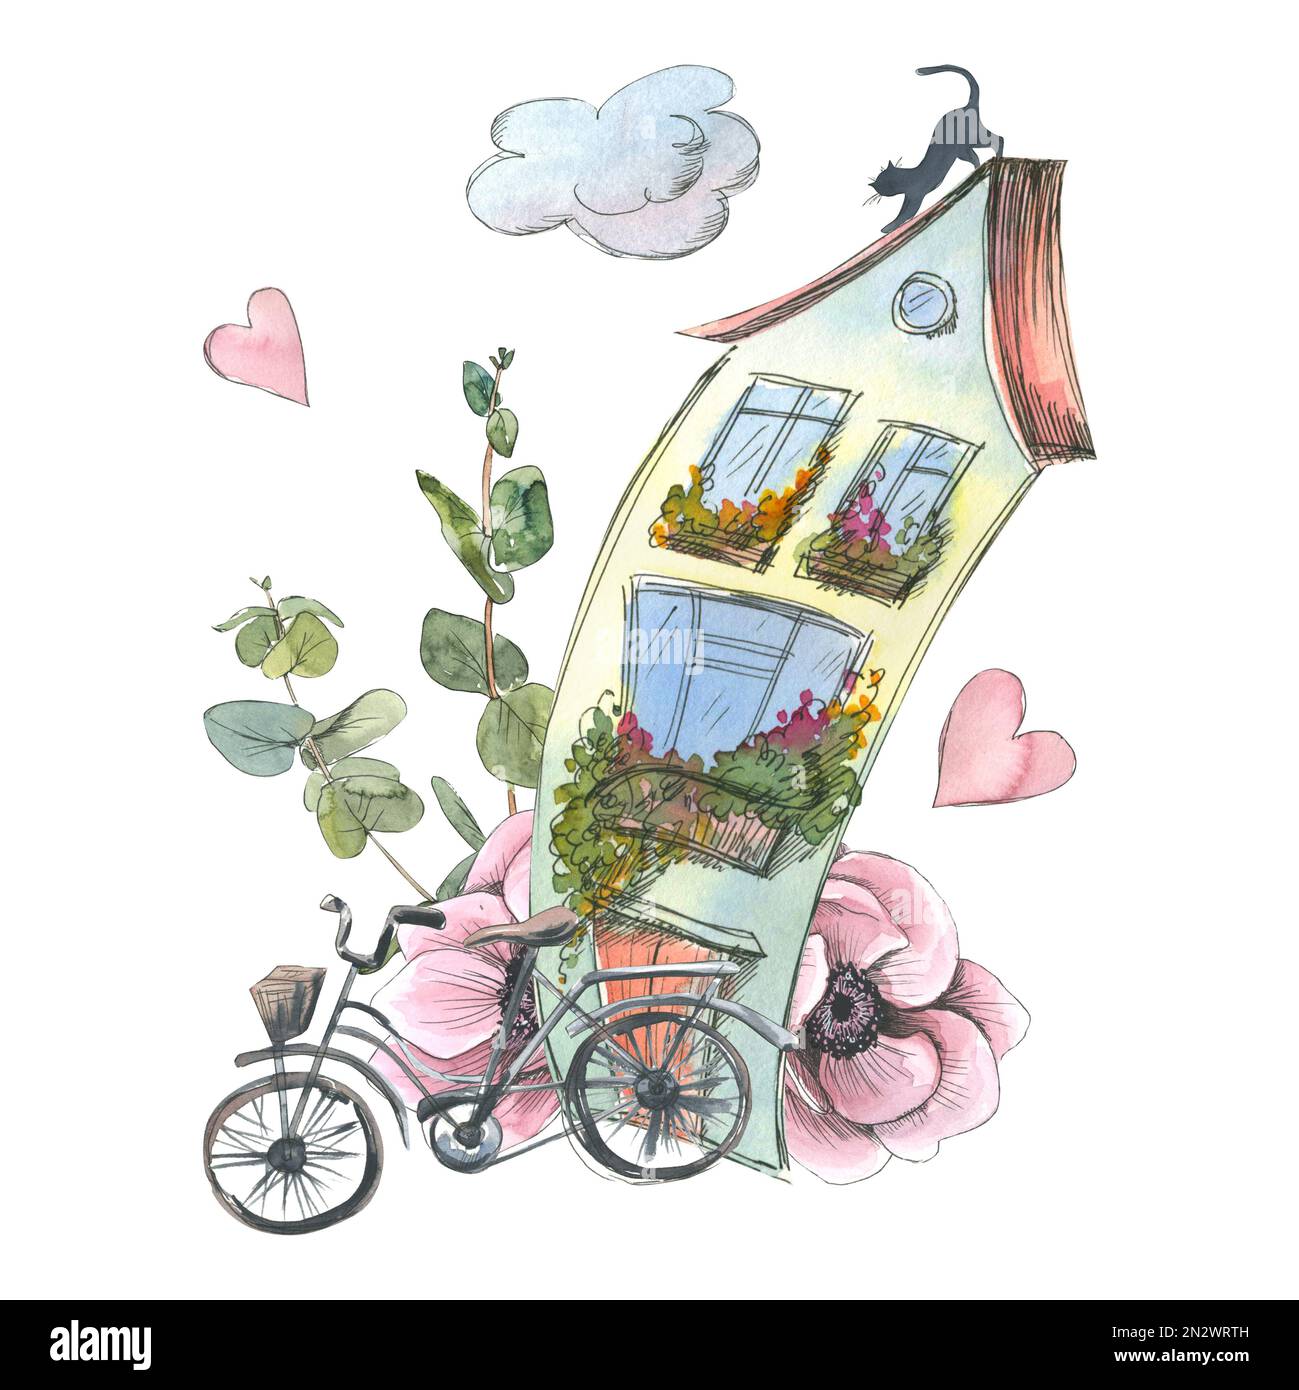 A cute European house with a bicycle, a cat, pink anemone flowers, eucalyptus twigs, hearts and clouds. Watercolor illustration in sketch style with Stock Photo